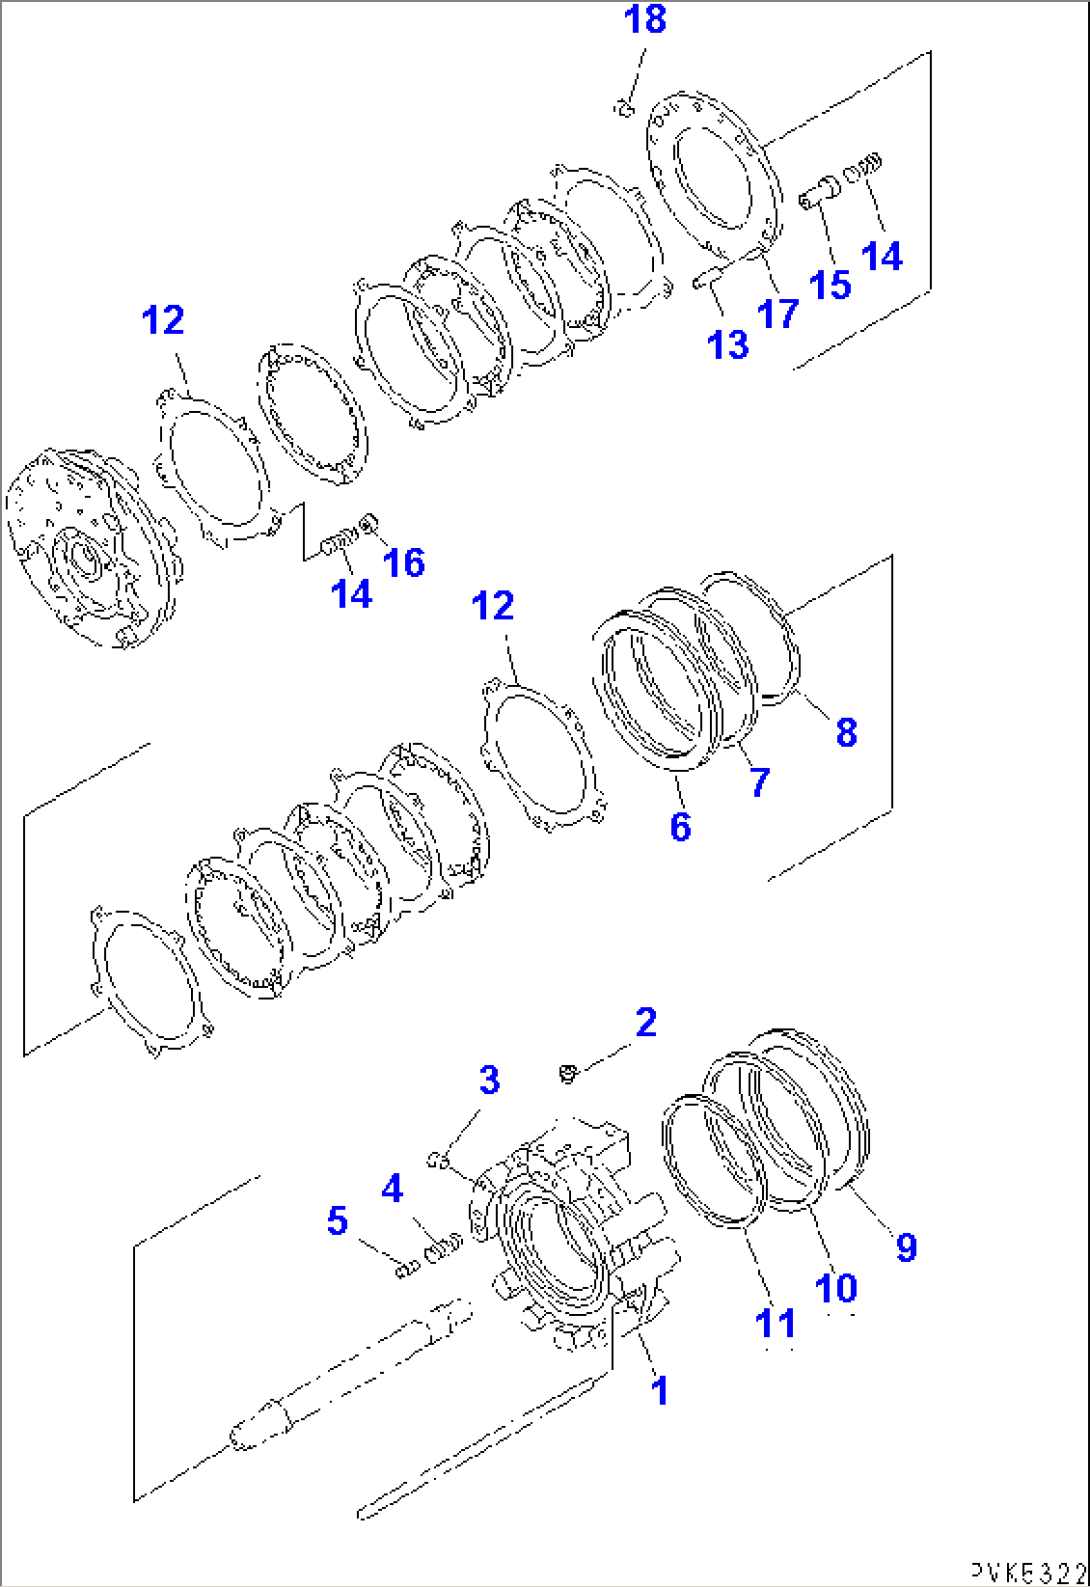 TRANSMISSION (F2-R2) (FORWARD AND 2ND HOUSING)